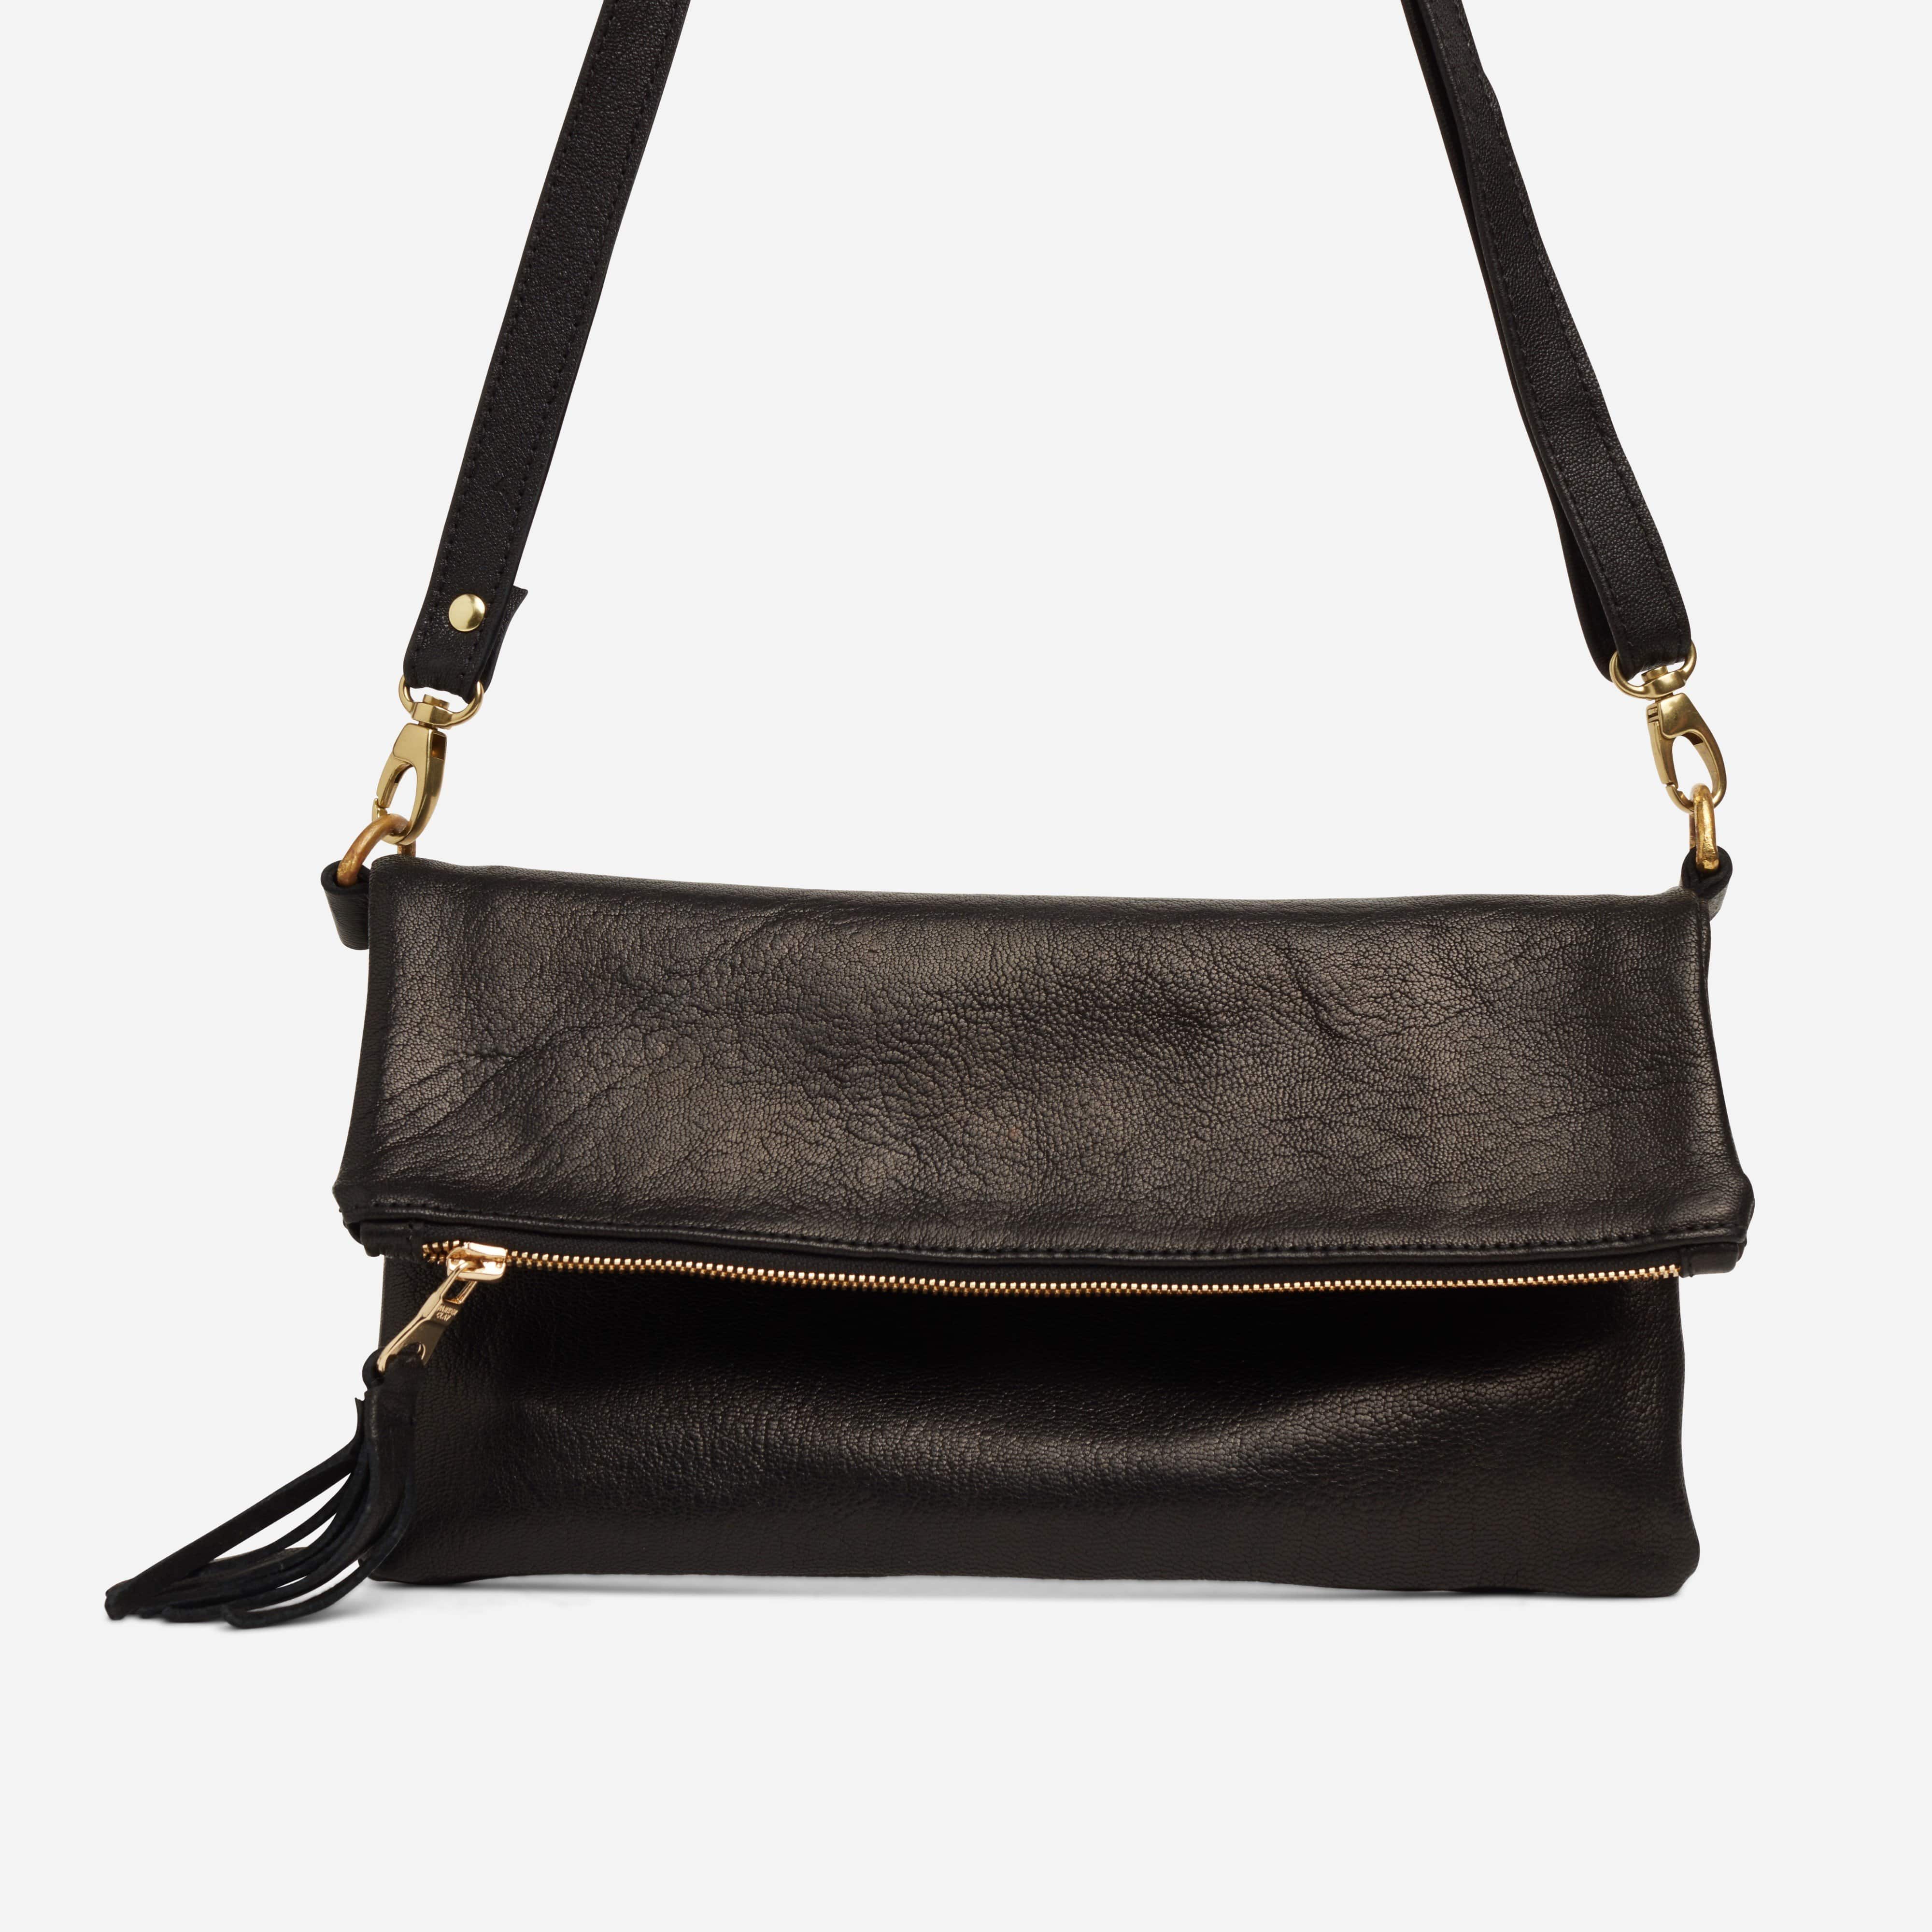 Black Cross Body Bag With Gold Chain